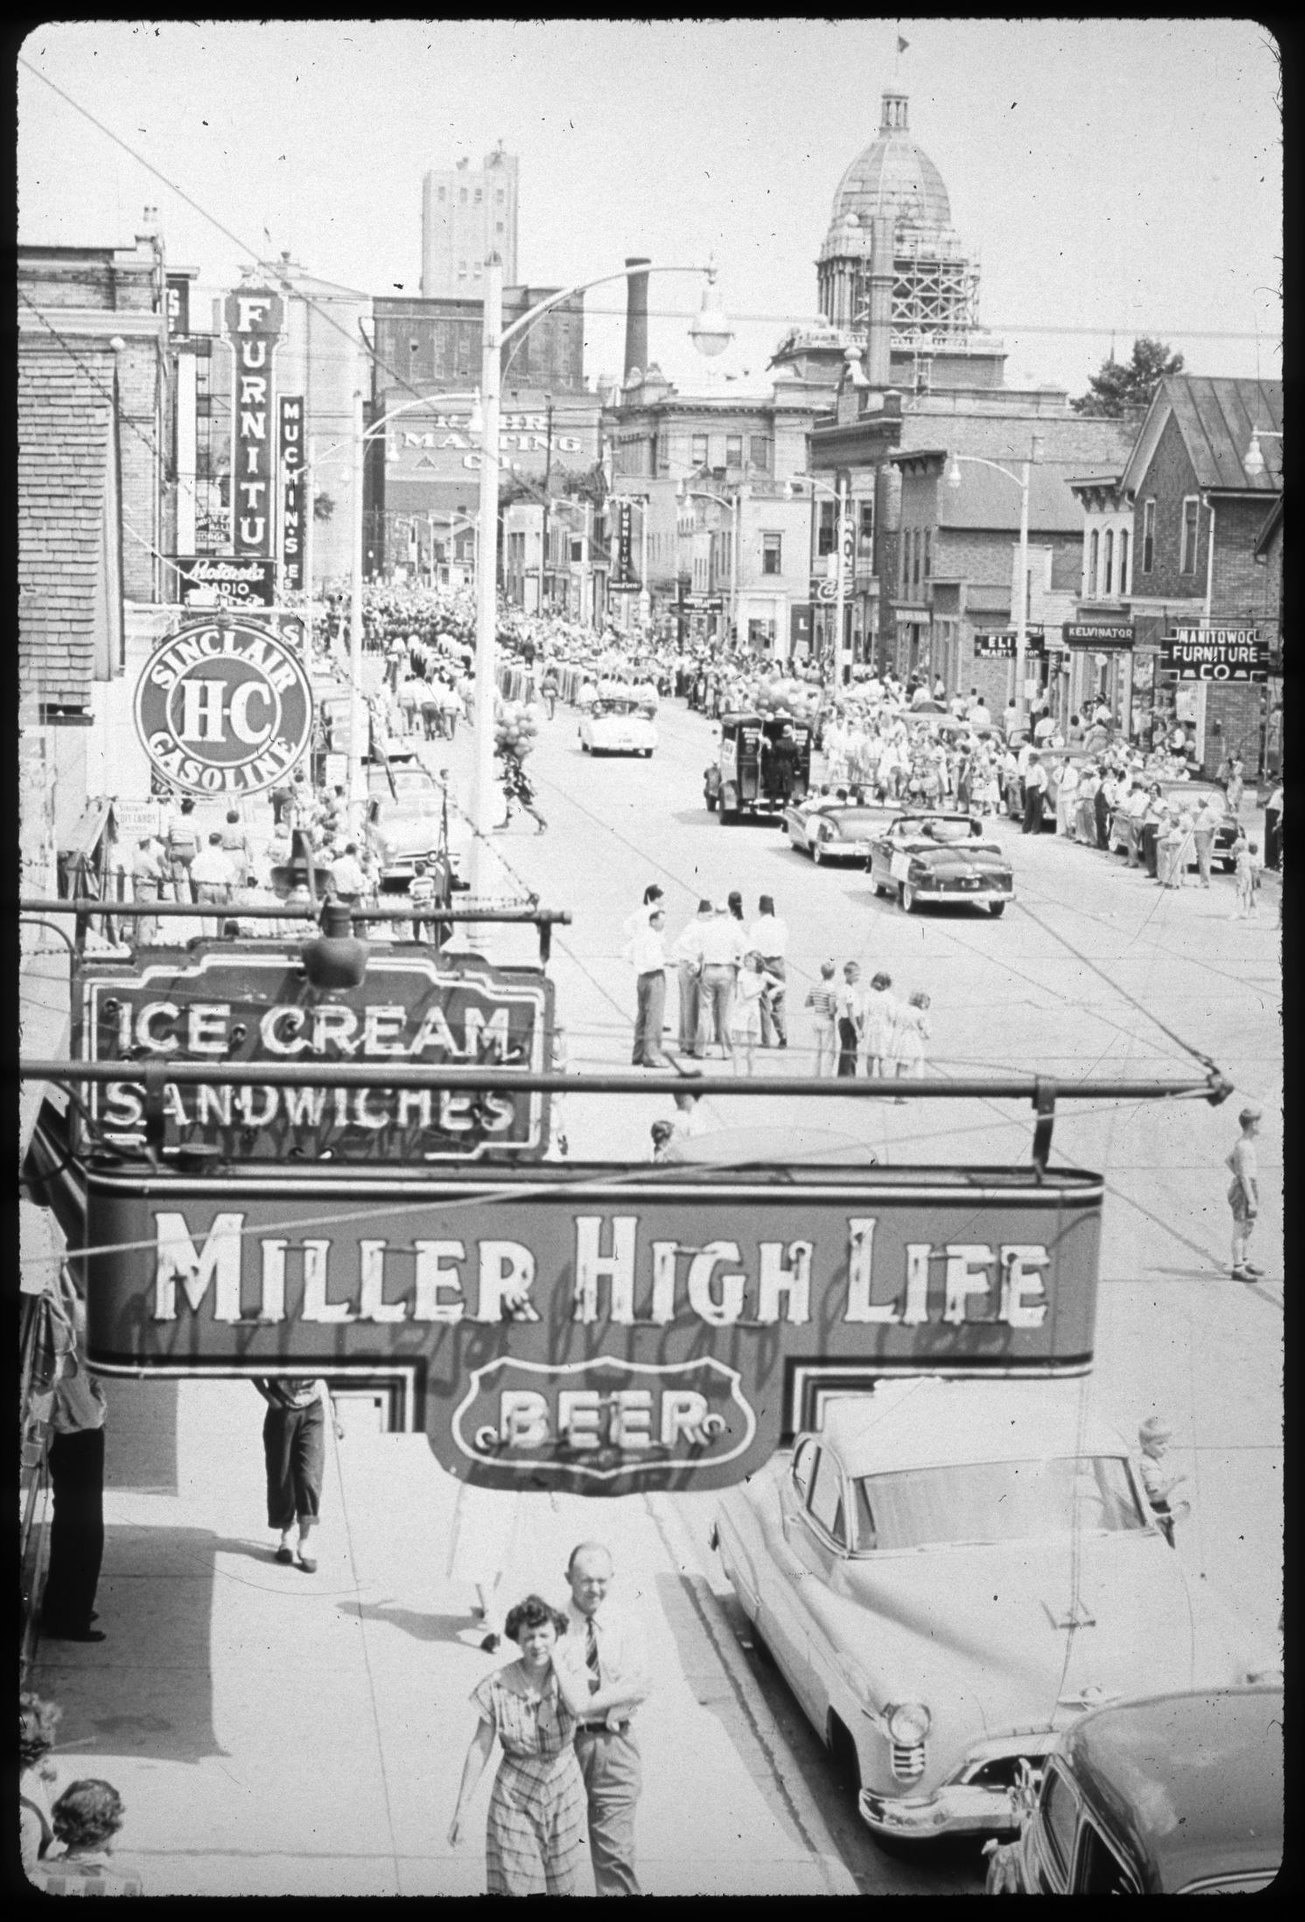 Taken from the upstairs of the Mikadow Theater looking east down Washington Street during a parade. Businesses in view include: Borris Furniture, Manitowoc Furniture Company, Siemers Refrigeration & Appliance Co., Elite Beauty Shop, Busse Radio Doctors, Inc, Rahr Malting, and the Manitowoc County Courthouse. Image taken by Francis Kadow. Undated.